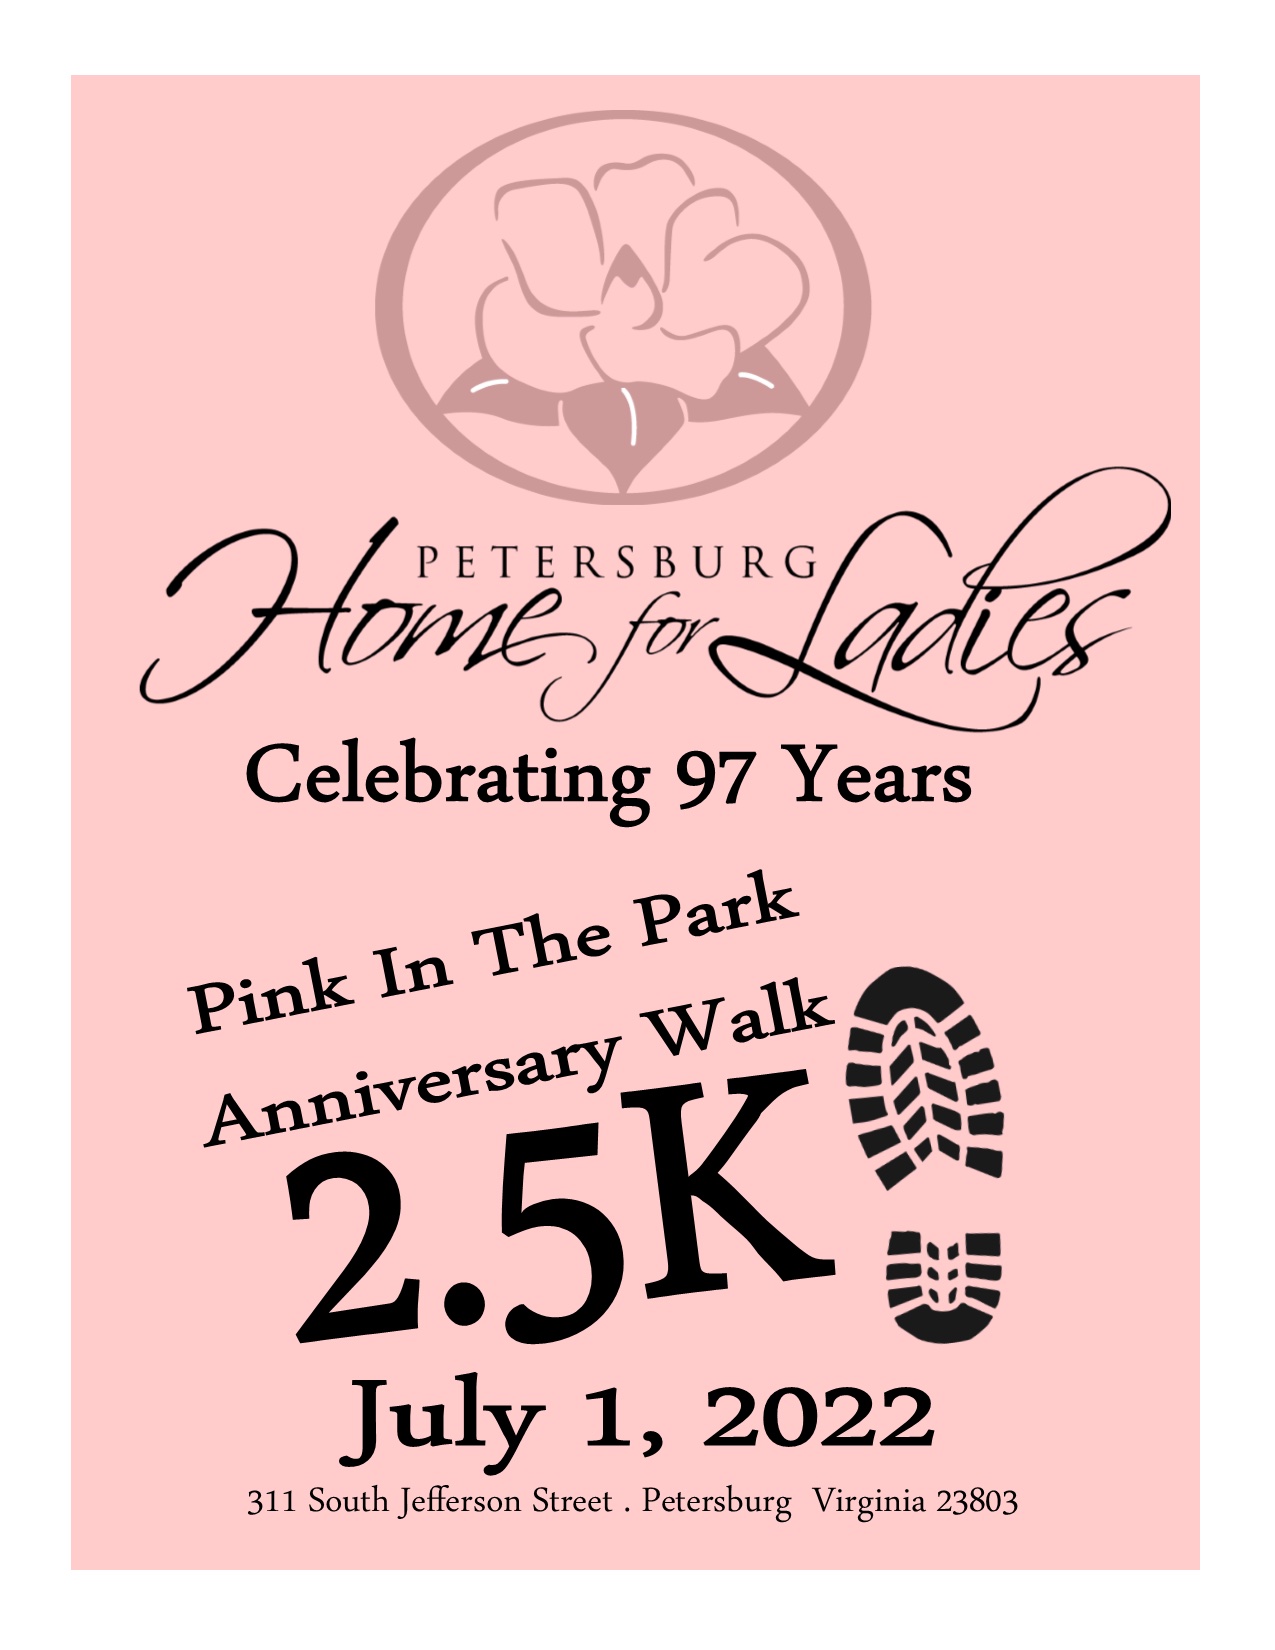 Pink in the Park Anniversary Walk